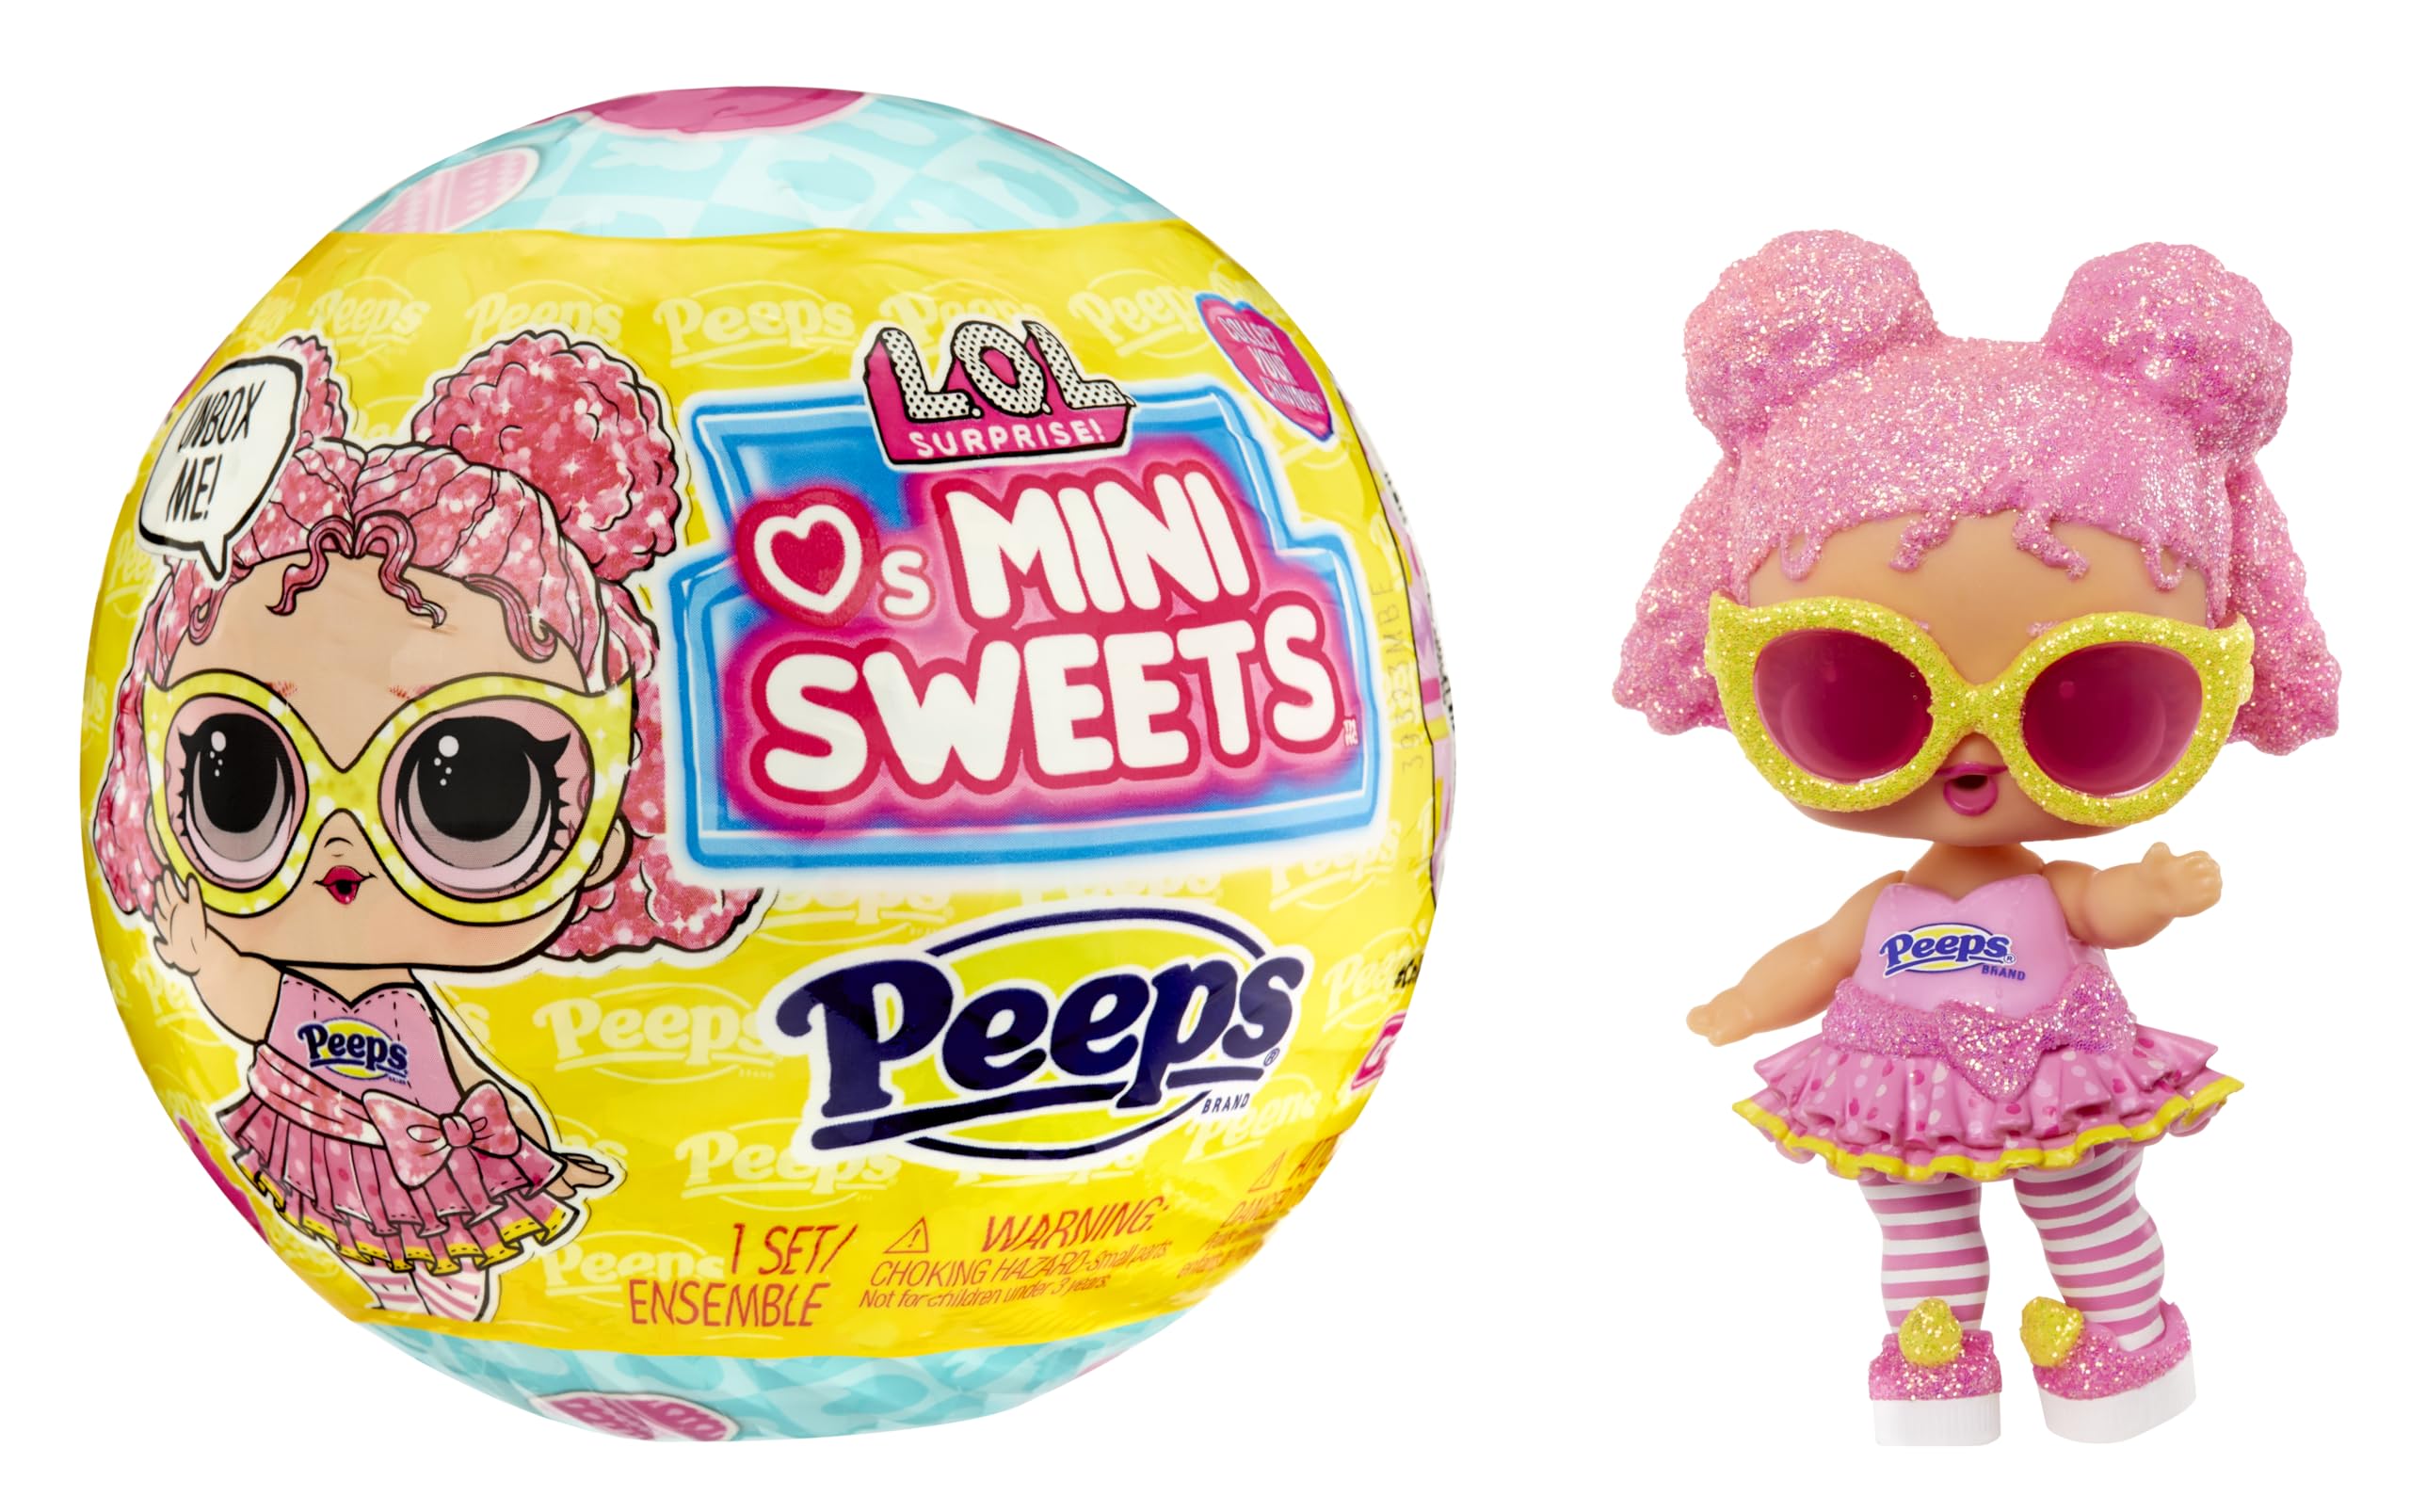 LOL Surprise! Loves Mini Sweets - Peeps – Fluff Chick – with Collectible Doll, 7 Surprises, Spring Theme, Peeps Limited Edition Doll- Great Gift for Girls Age 4+